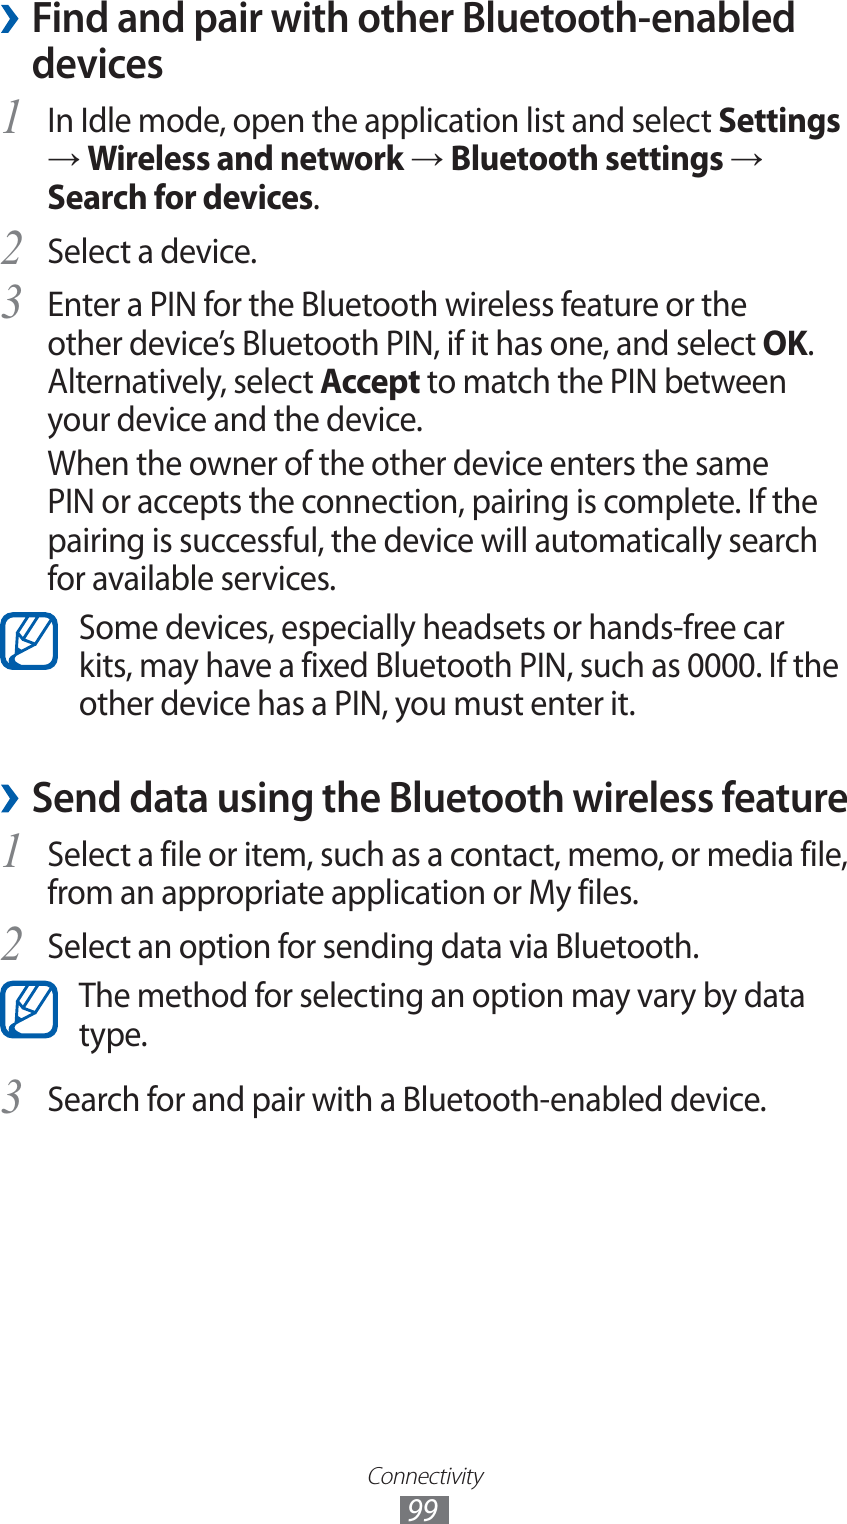 Connectivity99Find and pair with other Bluetooth-enabled  ›devicesIn Idle mode, open the application list and select 1 Settings → Wireless and network → Bluetooth settings → Search for devices.Select a device.2 Enter a PIN for the Bluetooth wireless feature or the 3 other device’s Bluetooth PIN, if it has one, and select OK. Alternatively, select Accept to match the PIN between your device and the device.When the owner of the other device enters the same PIN or accepts the connection, pairing is complete. If the pairing is successful, the device will automatically search for available services.Some devices, especially headsets or hands-free car kits, may have a fixed Bluetooth PIN, such as 0000. If the other device has a PIN, you must enter it.Send data using the Bluetooth wireless feature ›Select a file or item, such as a contact, memo, or media file, 1 from an appropriate application or My files.Select an option for sending data via Bluetooth.2 The method for selecting an option may vary by data type.Search for and pair with a Bluetooth-enabled device.3 